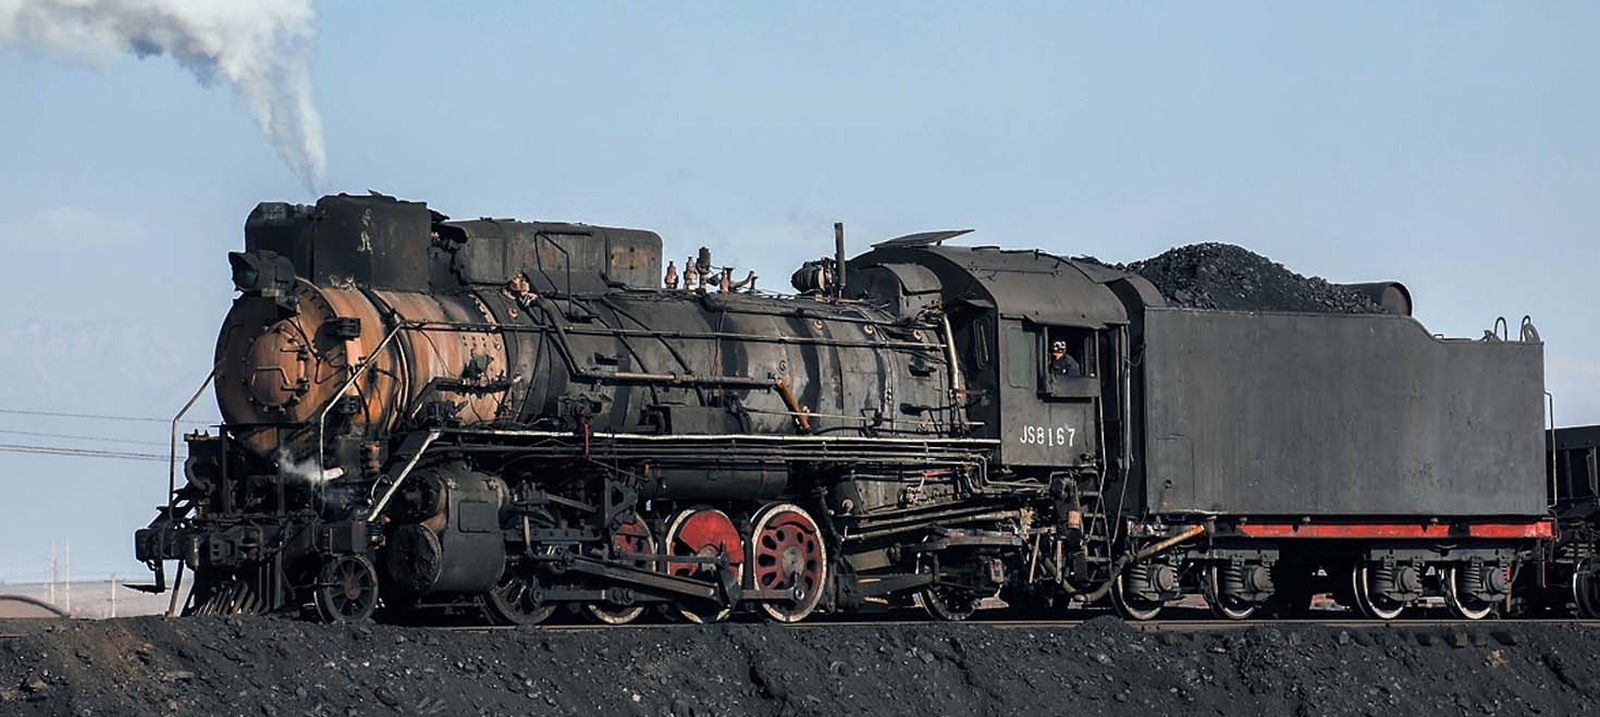 JS 8167 in action at the Sandaoling coal mine in December 2017